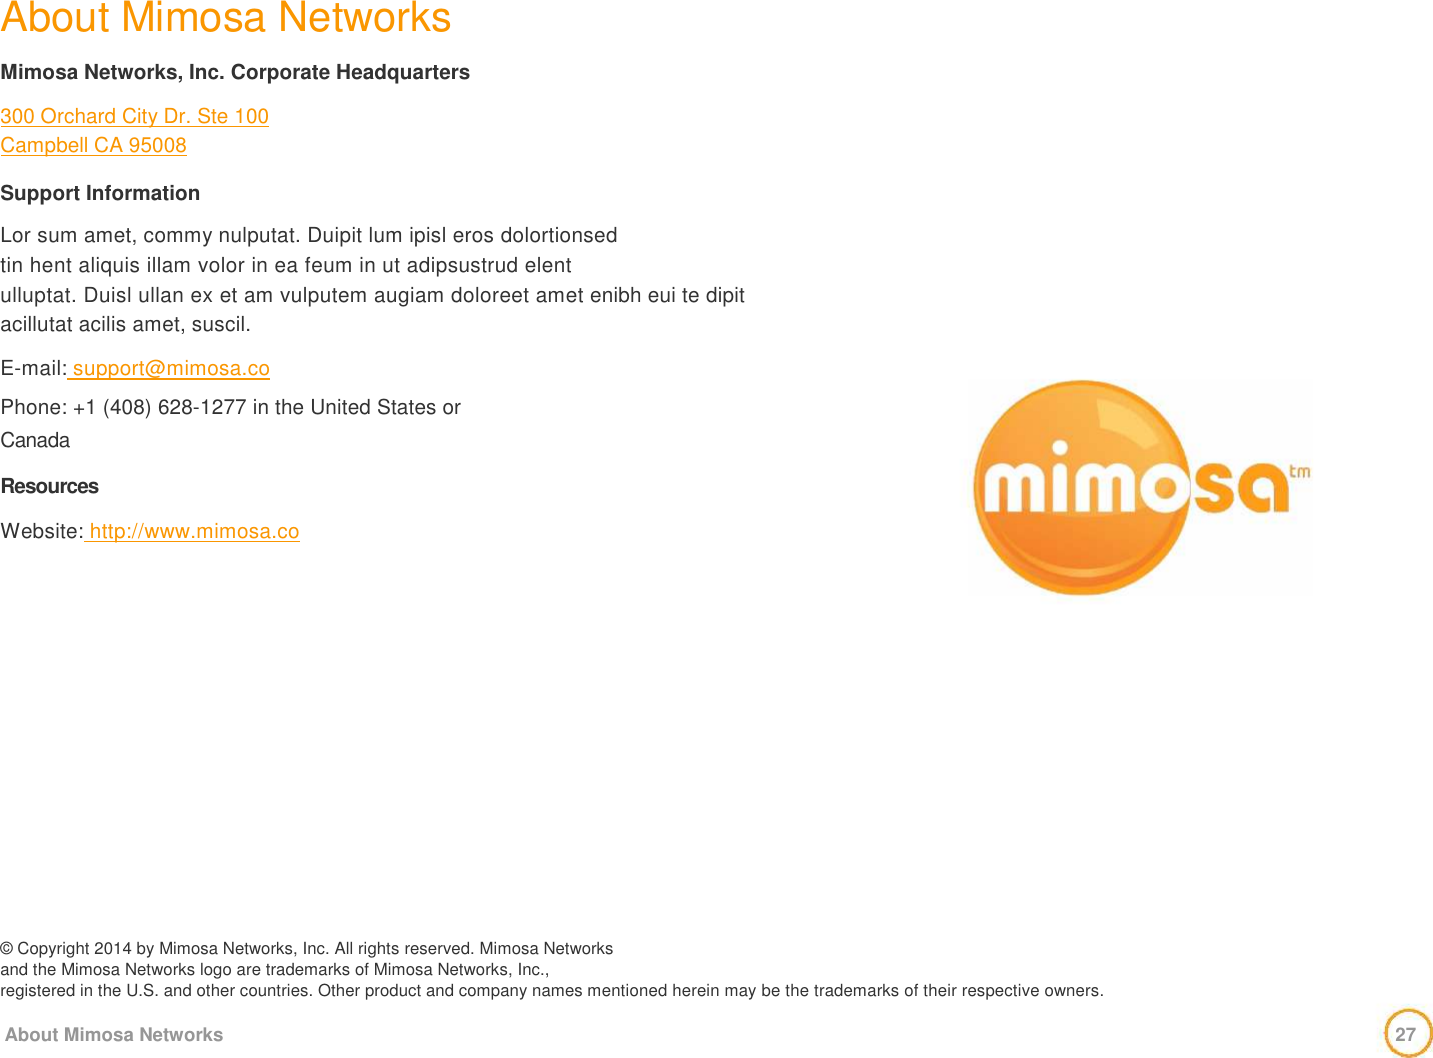  About Mimosa Networks   Mimosa Networks, Inc. Corporate Headquarters   300 Orchard City Dr. Ste 100  Campbell CA 95008   Support Information   Lor sum amet, commy nulputat. Duipit lum ipisl eros dolortionsed  tin hent aliquis illam volor in ea feum in ut adipsustrud elent  ulluptat. Duisl ullan ex et am vulputem augiam doloreet amet enibh eui te dipit acillutat acilis amet, suscil.   E-mail: support@mimosa.co  Phone: +1 (408) 628-1277 in the United States or  Canada   Resources   Website: http://www.mimosa.co                   © Copyright 2014 by Mimosa Networks, Inc. All rights reserved. Mimosa Networks  and the Mimosa Networks logo are trademarks of Mimosa Networks, Inc.,  registered in the U.S. and other countries. Other product and company names mentioned herein may be the trademarks of their respective owners.   About Mimosa Networks                                         27       